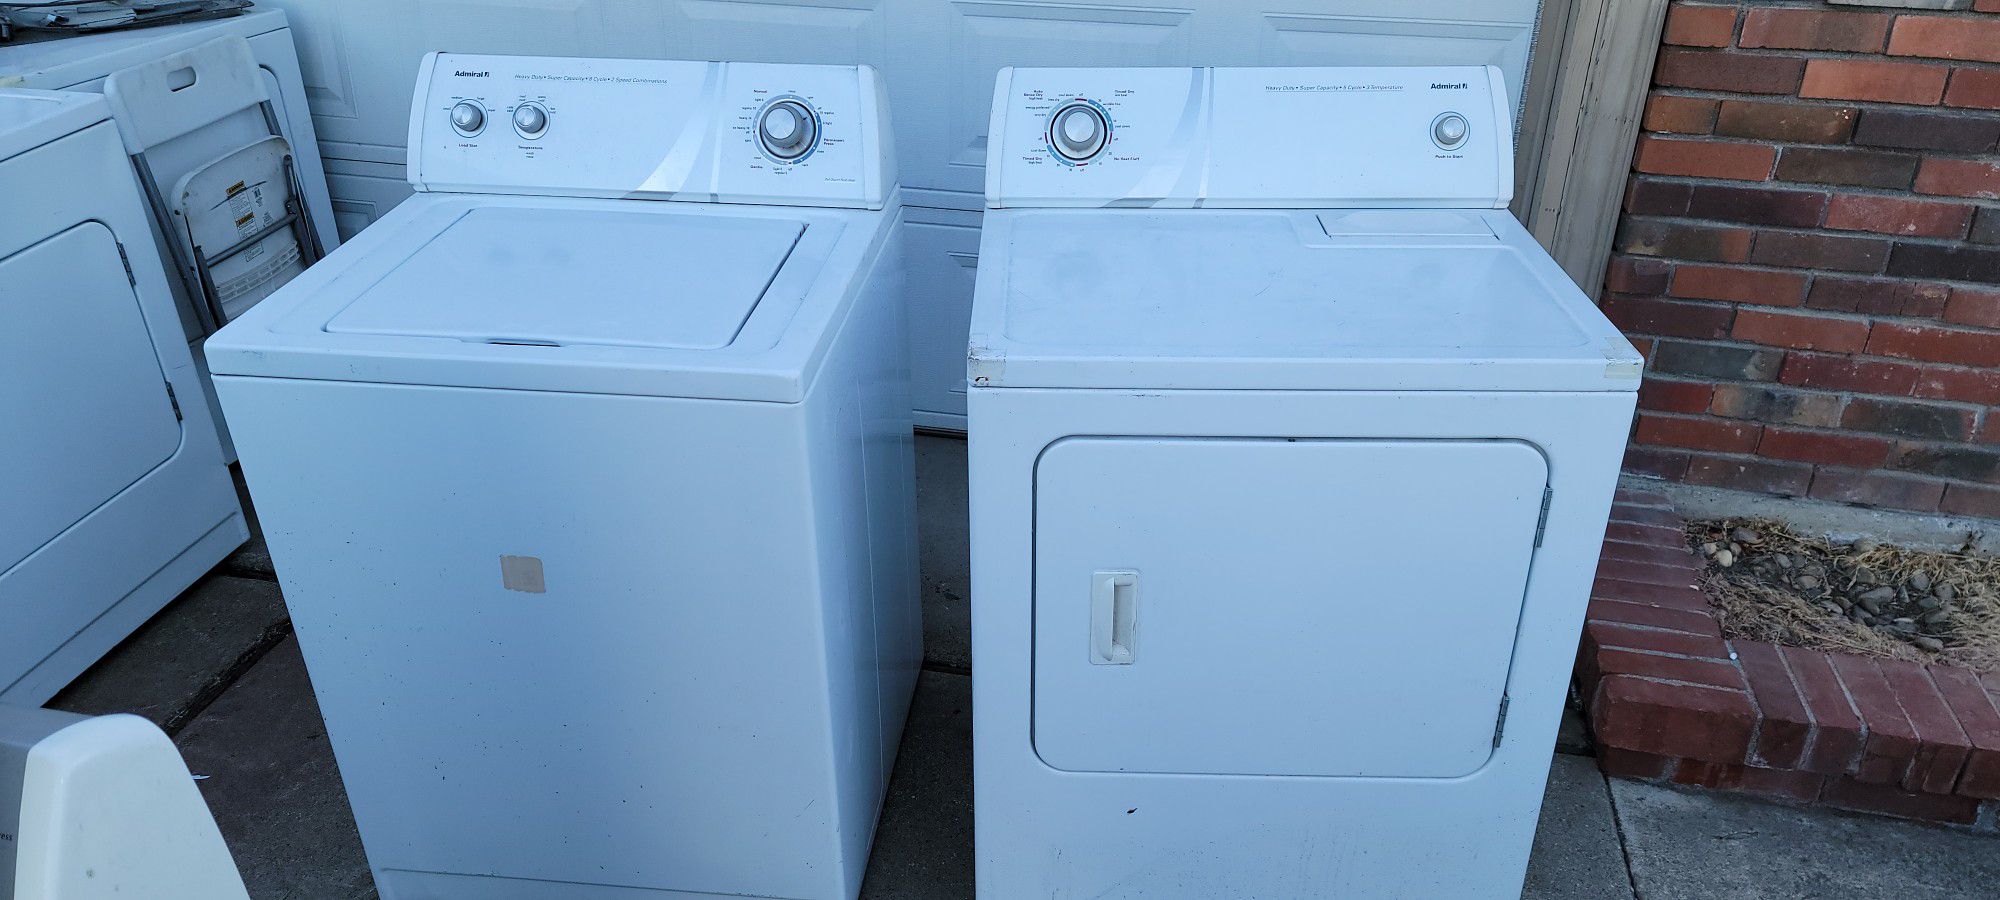 Matching Washer And Dryer Set 